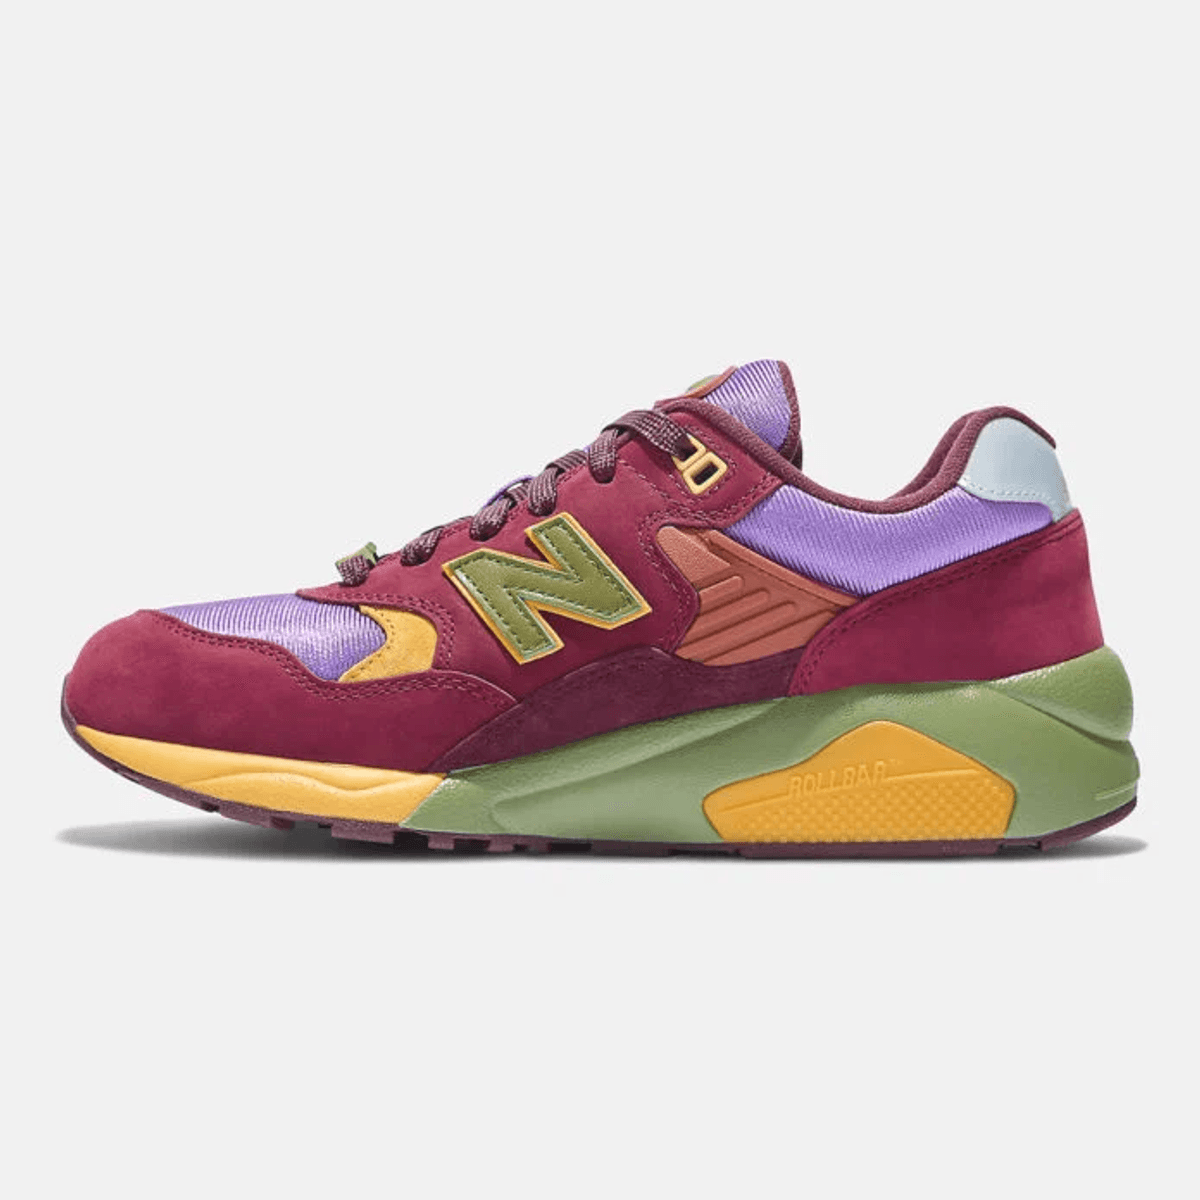 The Stray Rats x New Balance 580 Burgundy Olive is a Eye-Catching Sneaker Perfect for Fall